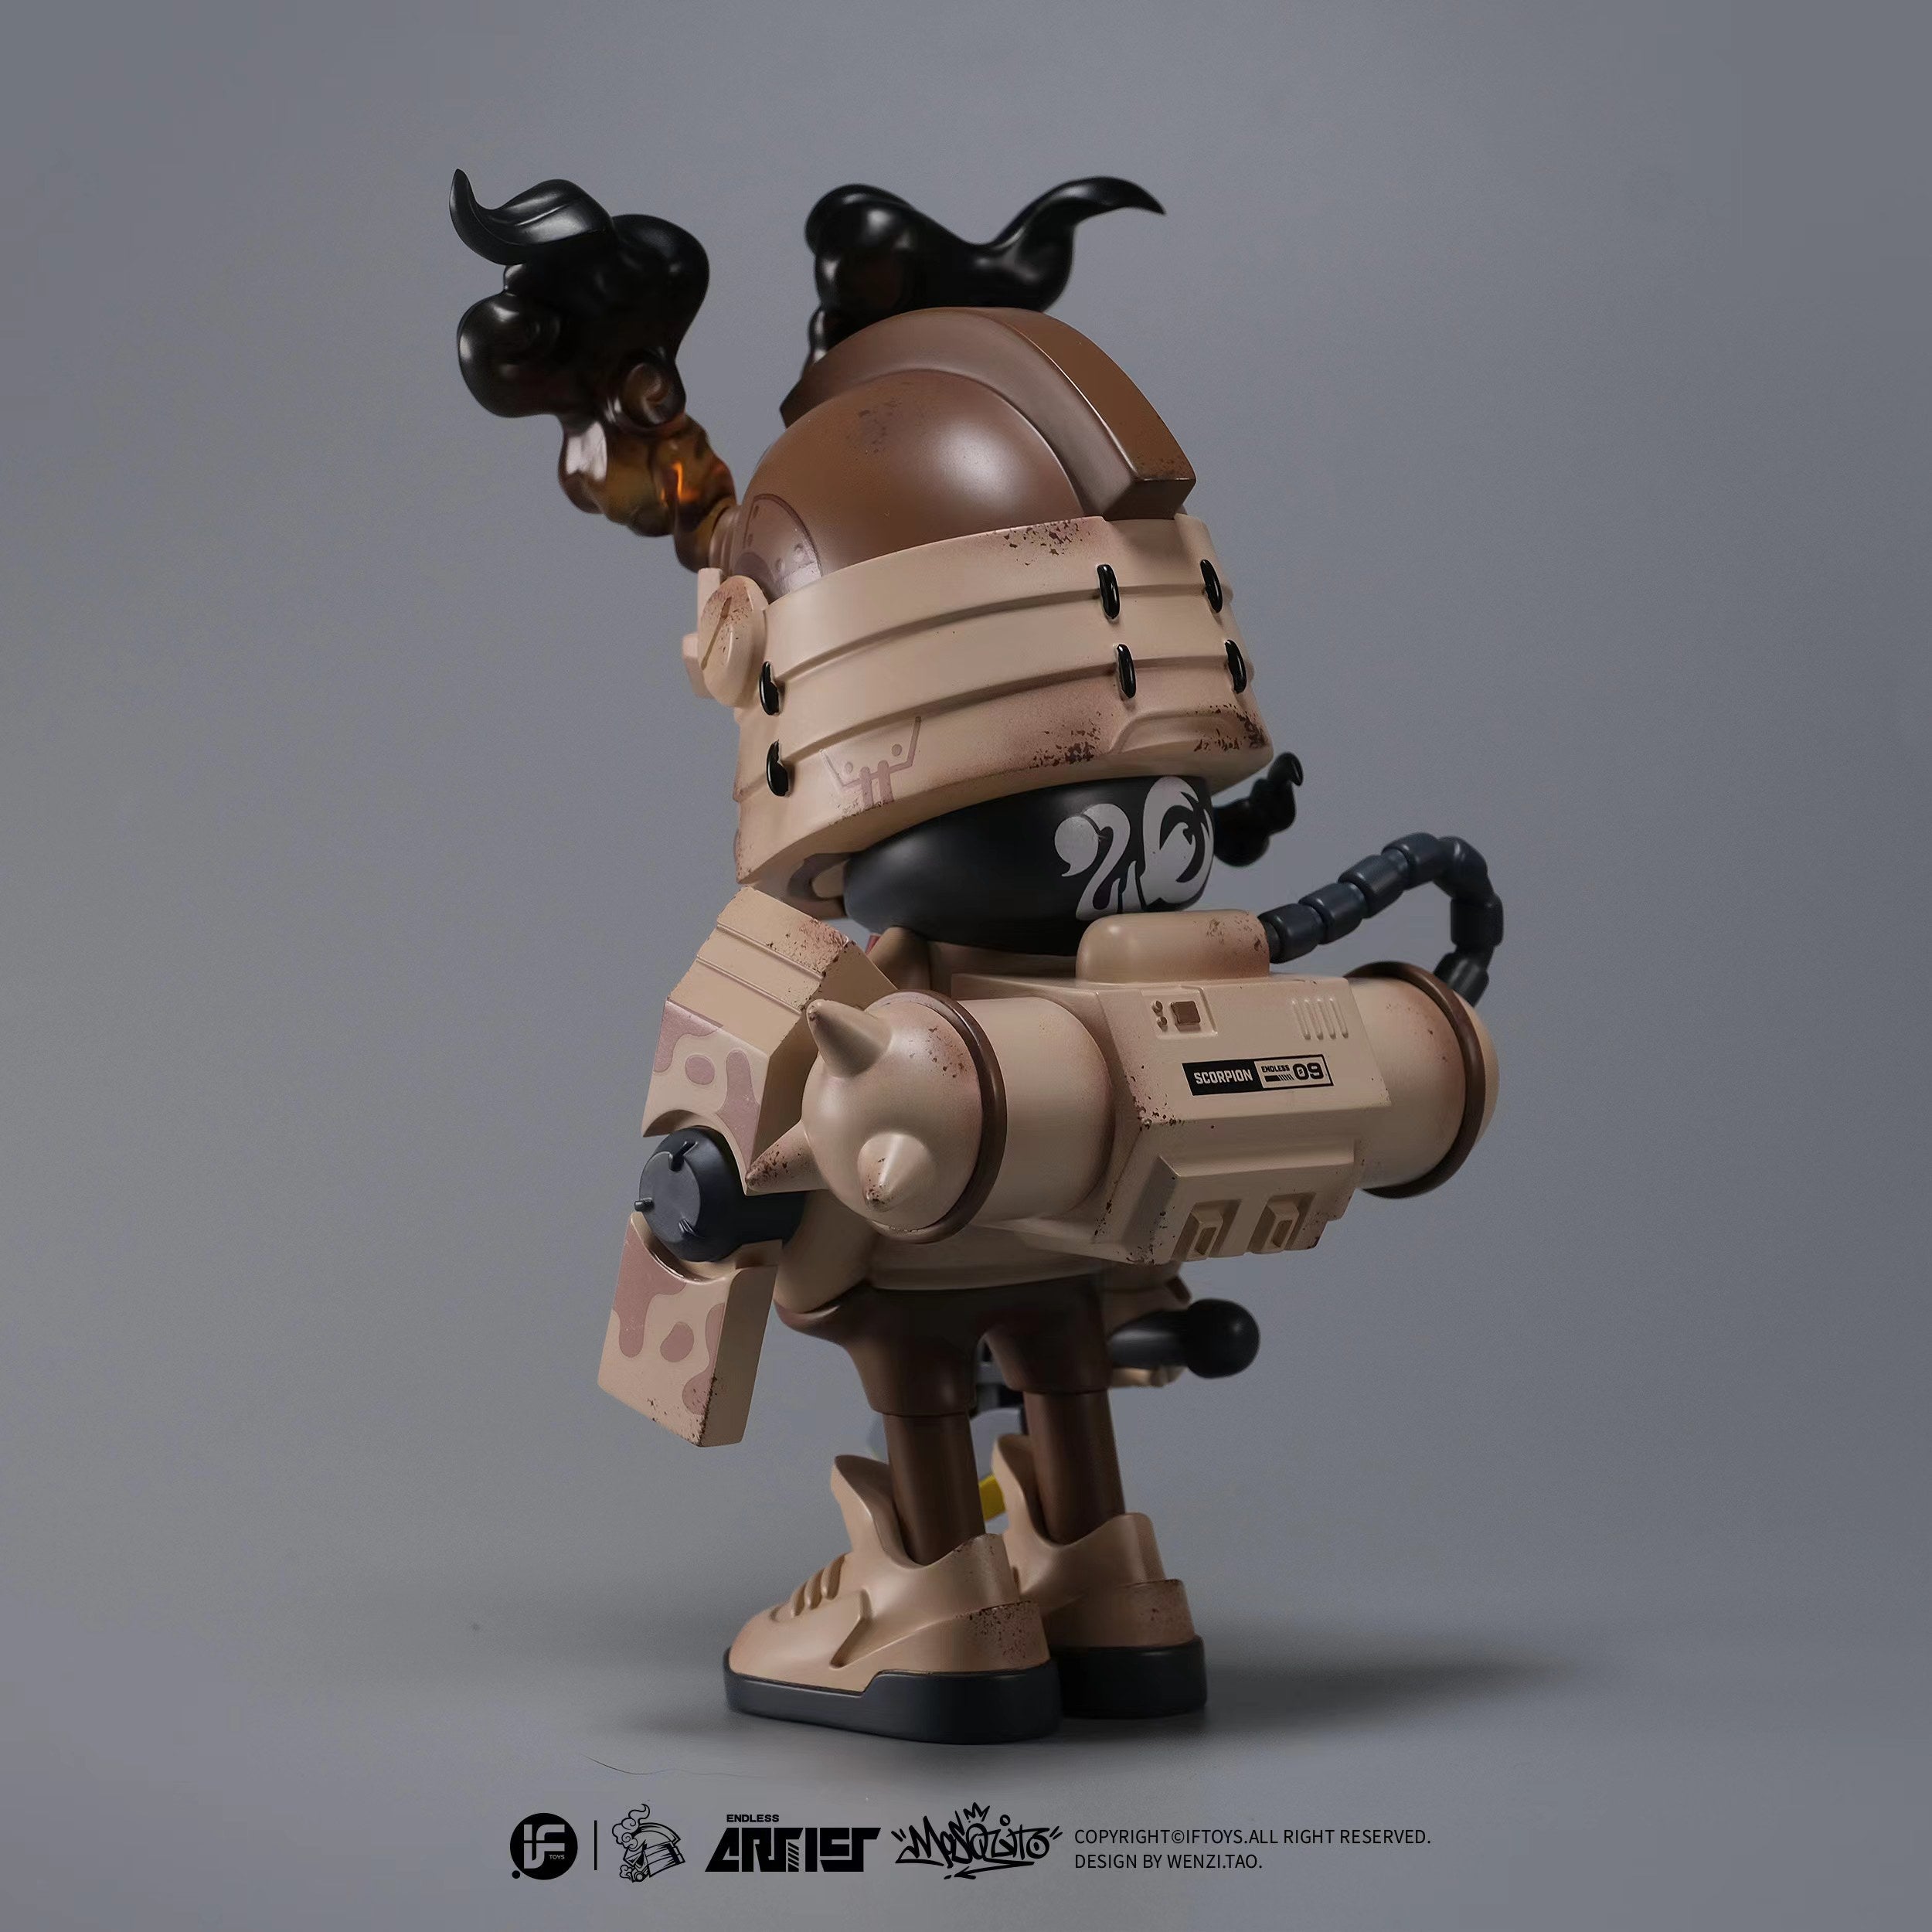 A blind box and art toy store presents ENDLESS SERIES -- Scorpion Force 09 By Wenzi.Tao: a 6.1 figurine of a robot with a gun, limited to 198, made of PU Resin.